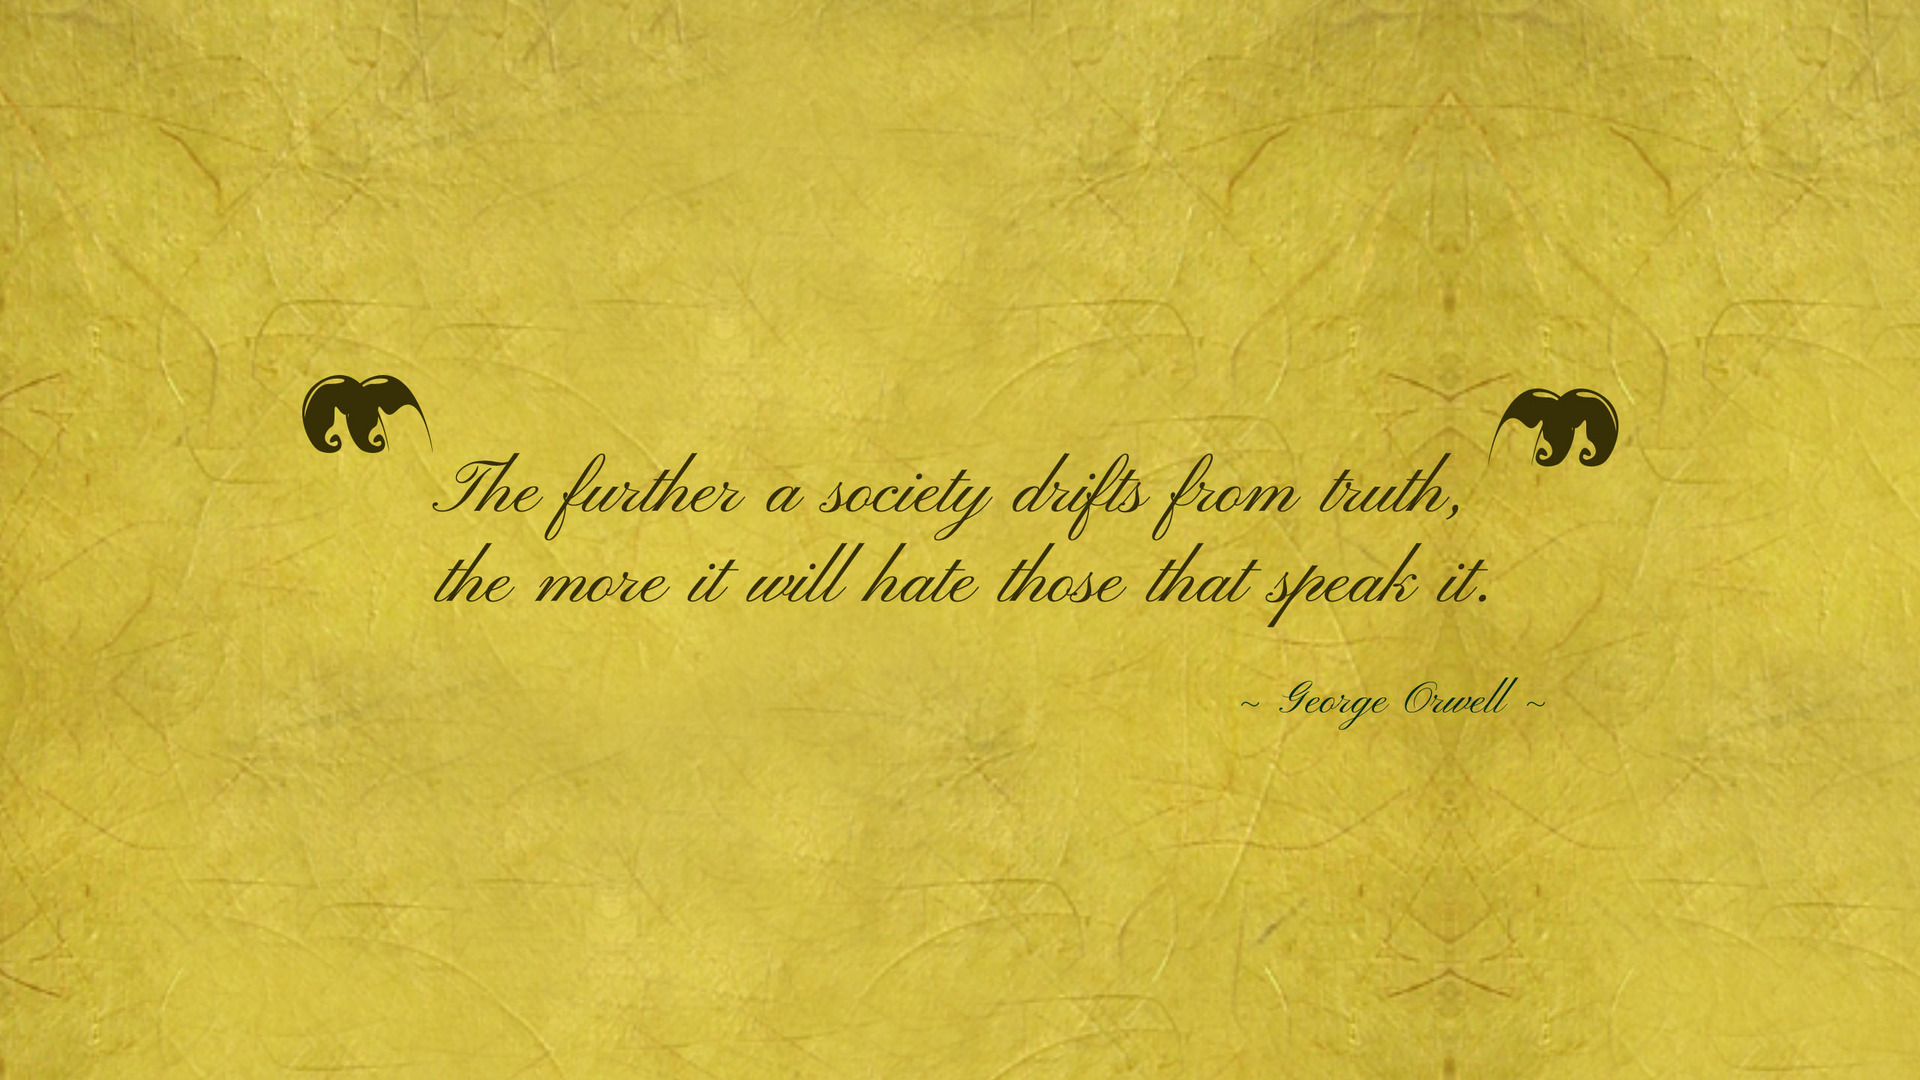 The further a society drifts from truth wallpaper -